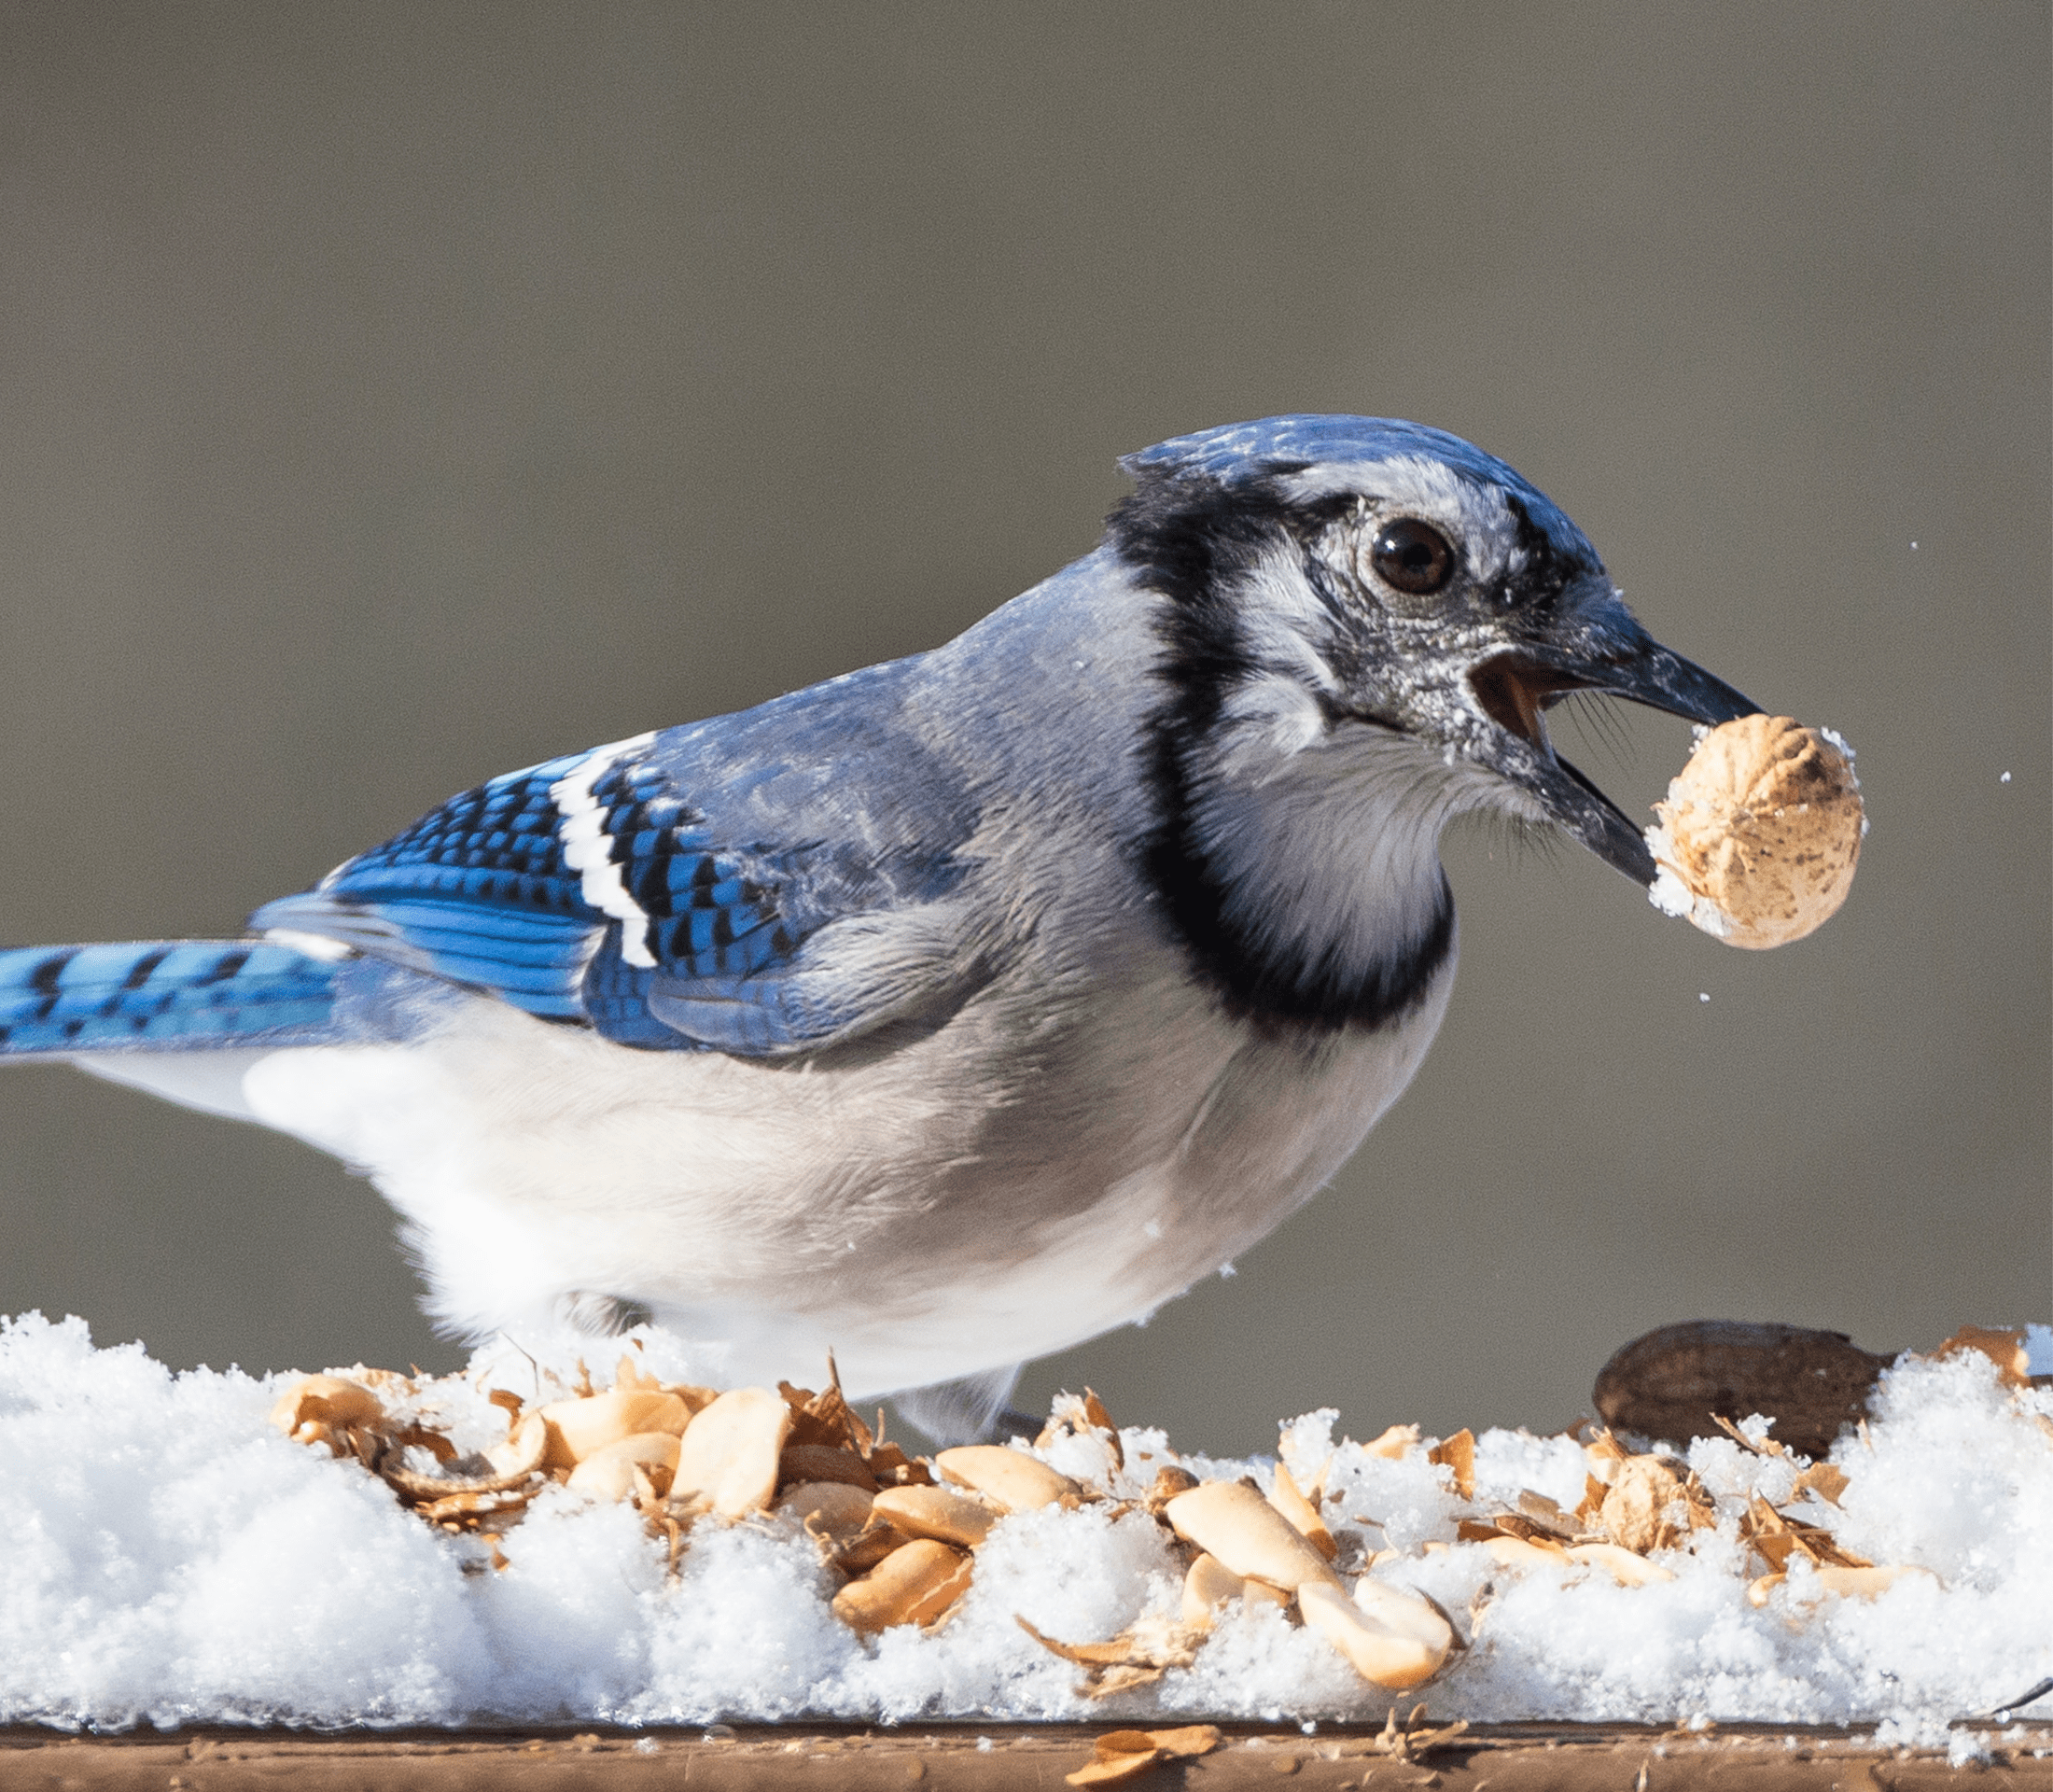 Blue bird pecking on a seed from the snow